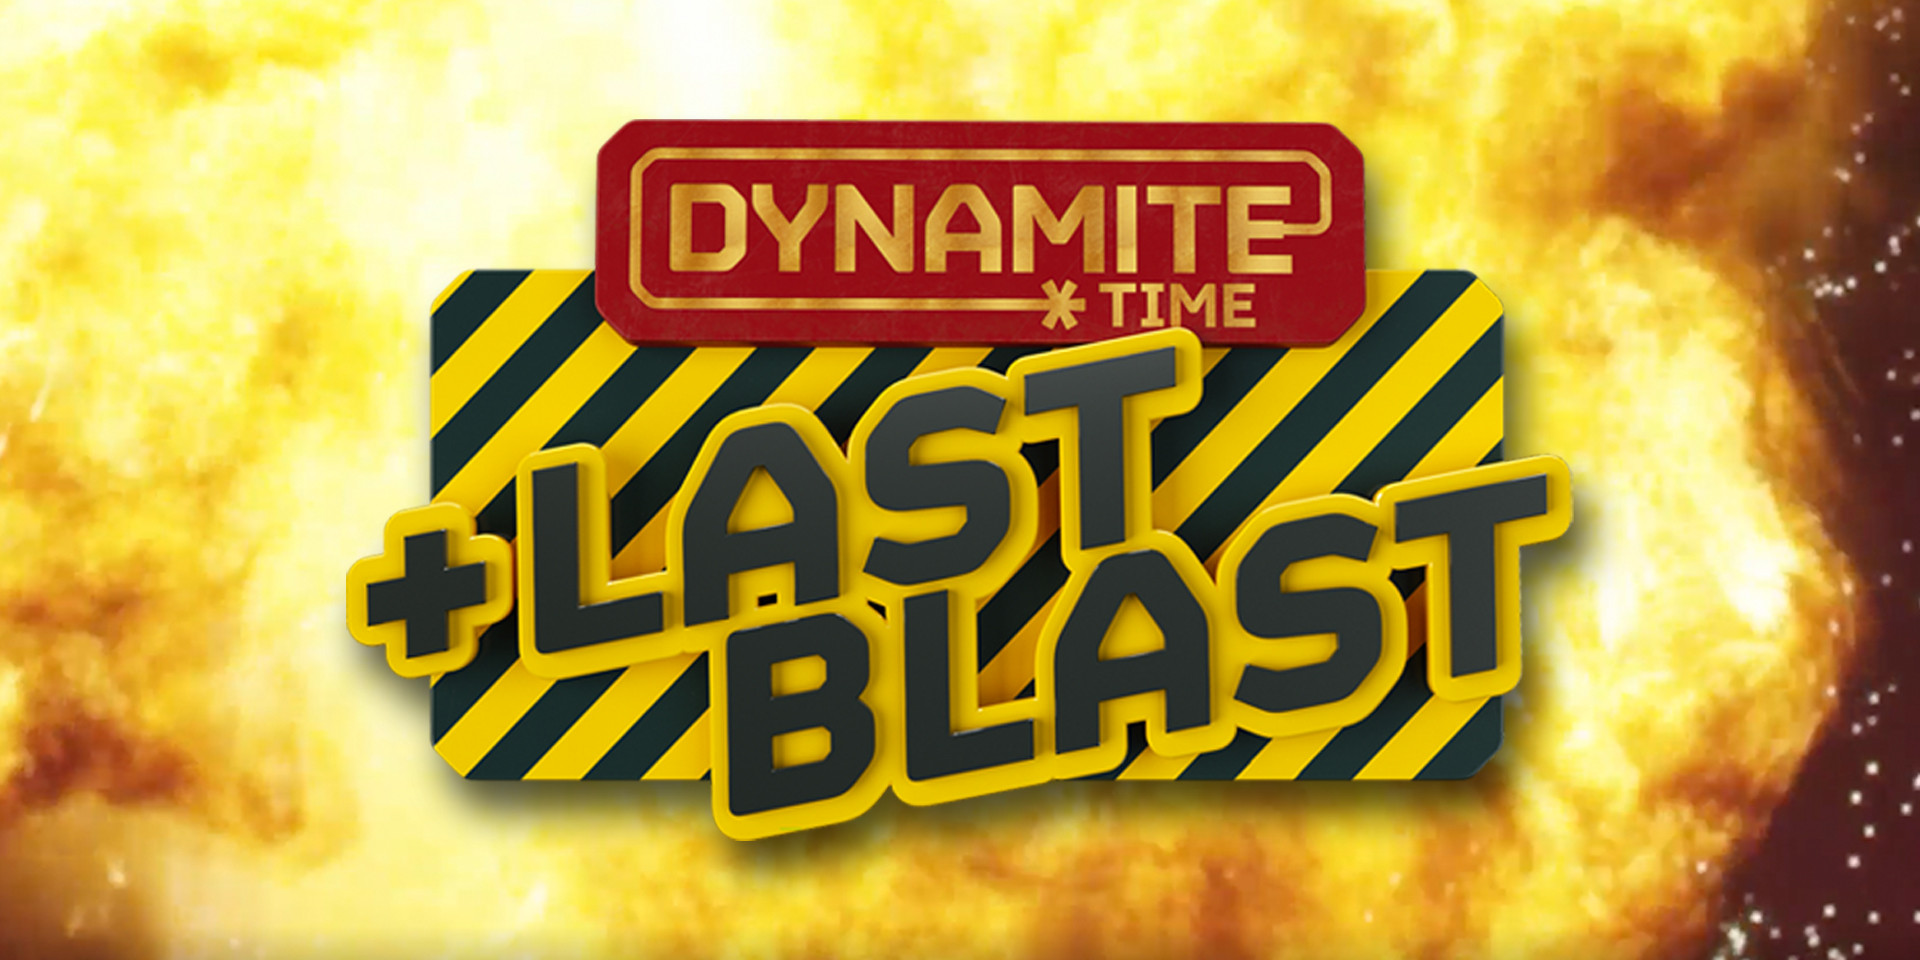 IT'S TIME FOR DYNAMITE TIME